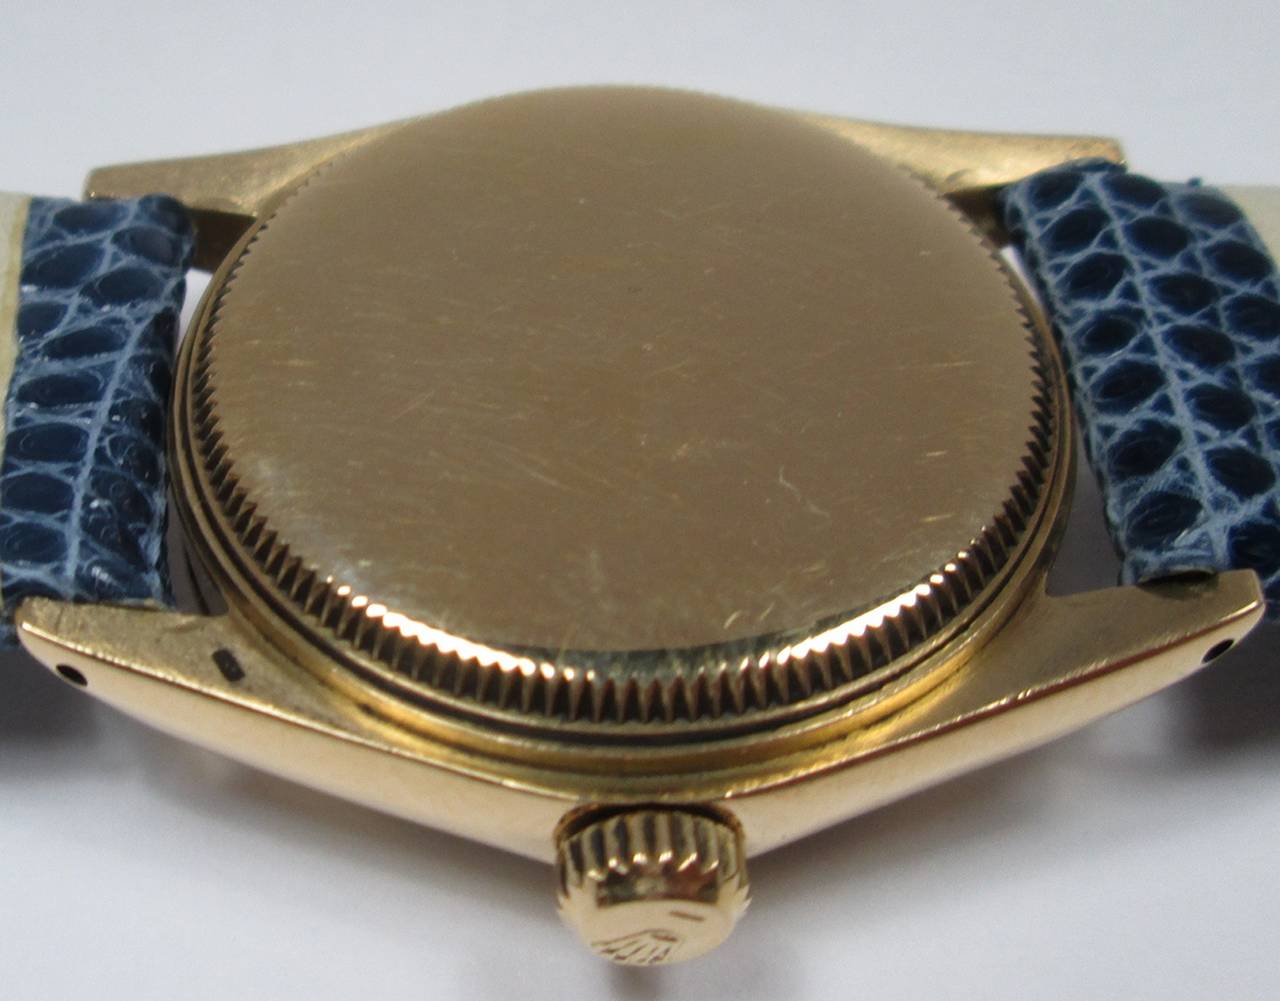 Oyster Perpetual, Ref. 6551, Case No. 1807534, circa 1968

26-jewel Cal. 1130 movement, silvered dial with applied baton and luminous dot indexes, gold hands with luminous inserts, within a screw back case with fluted bezel and screw down crown,